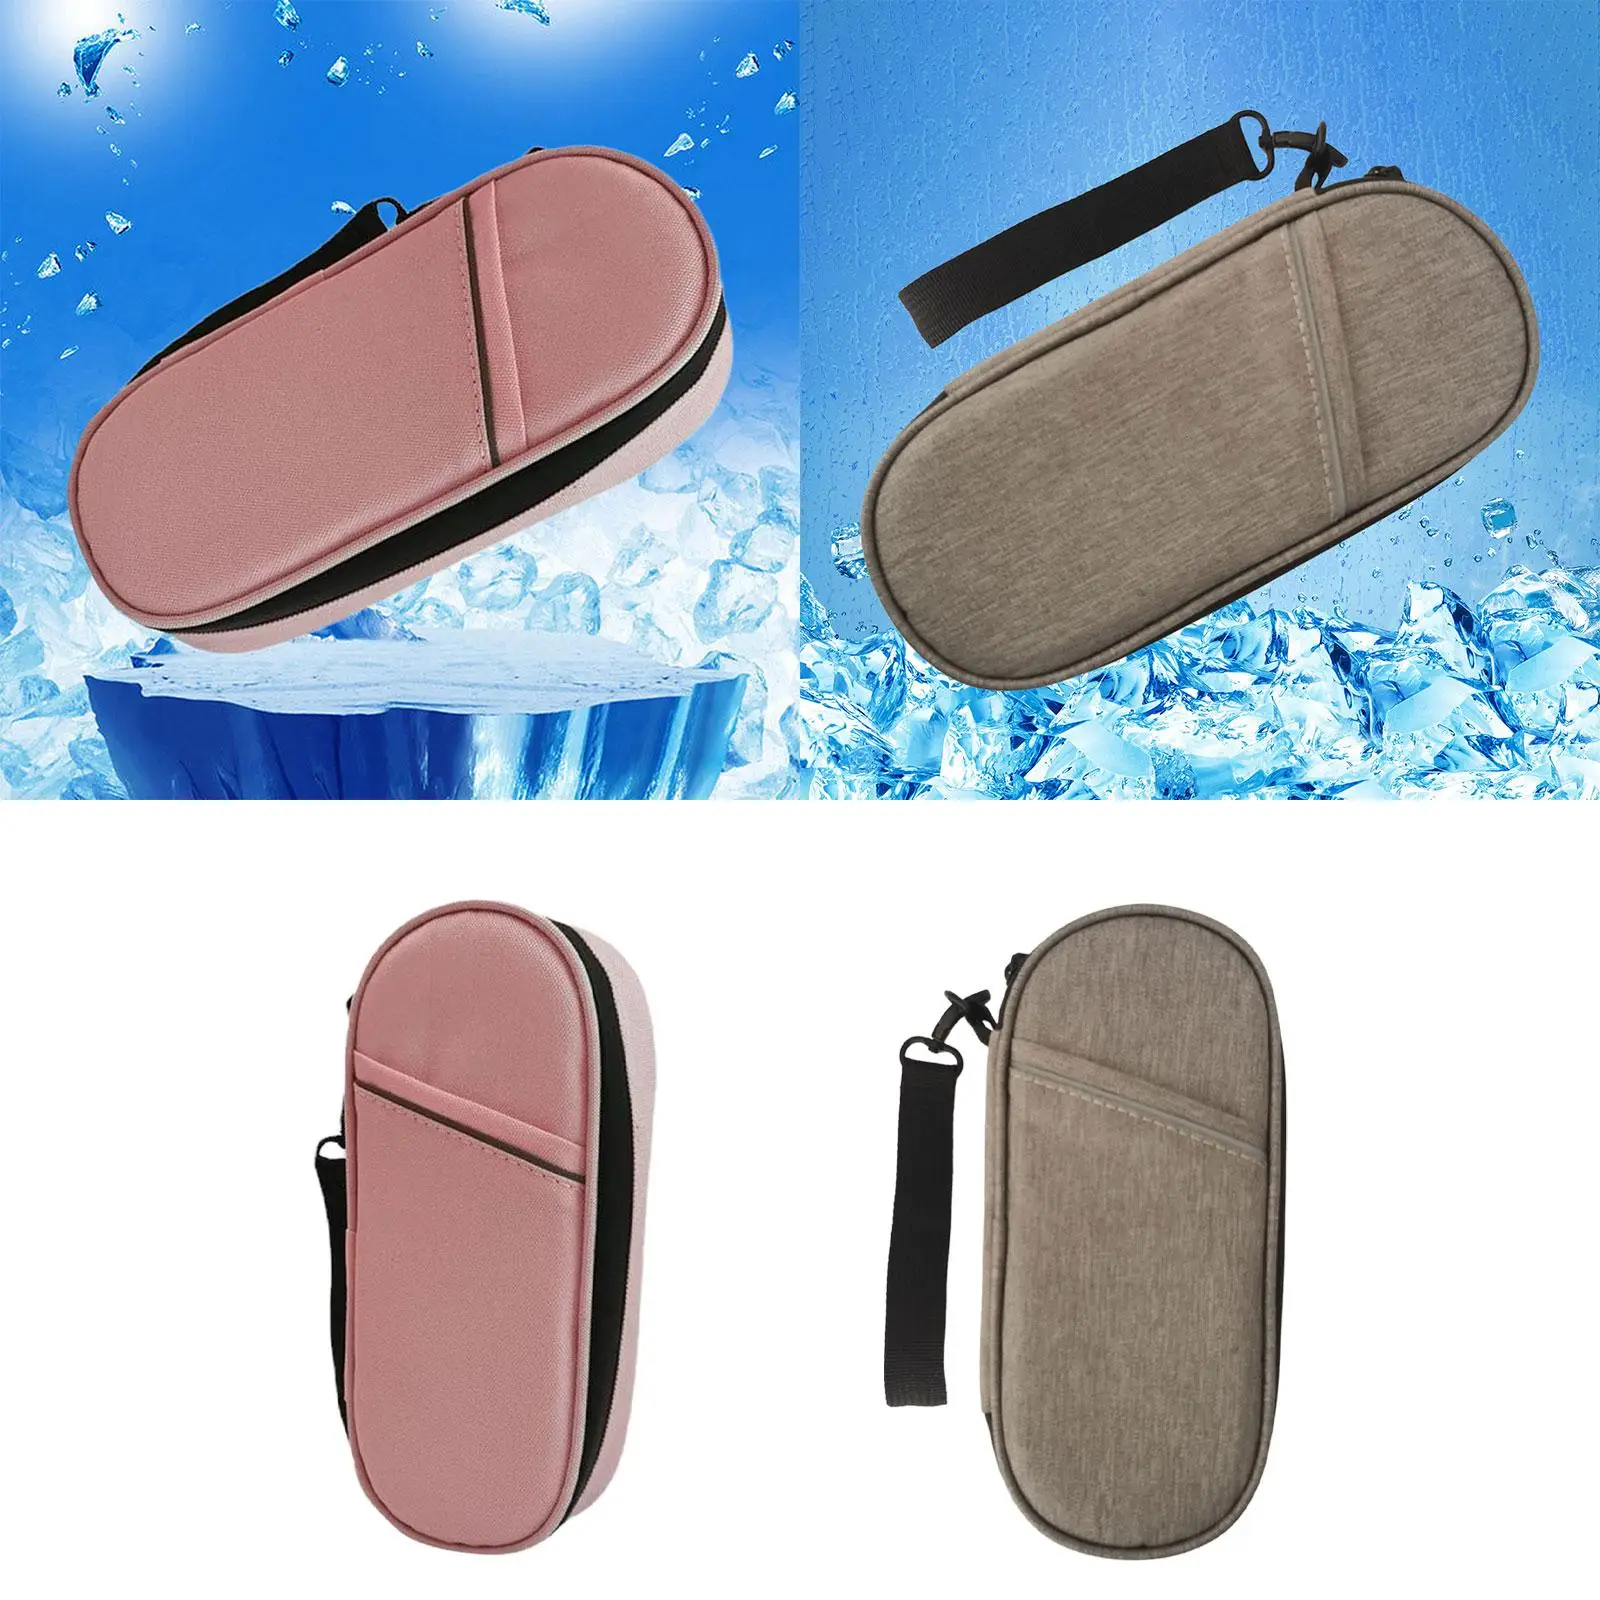 Pill Cooling Bag Refrigerated Ice Pack Cooler Bag for Monitor Supplies Cooling Cases